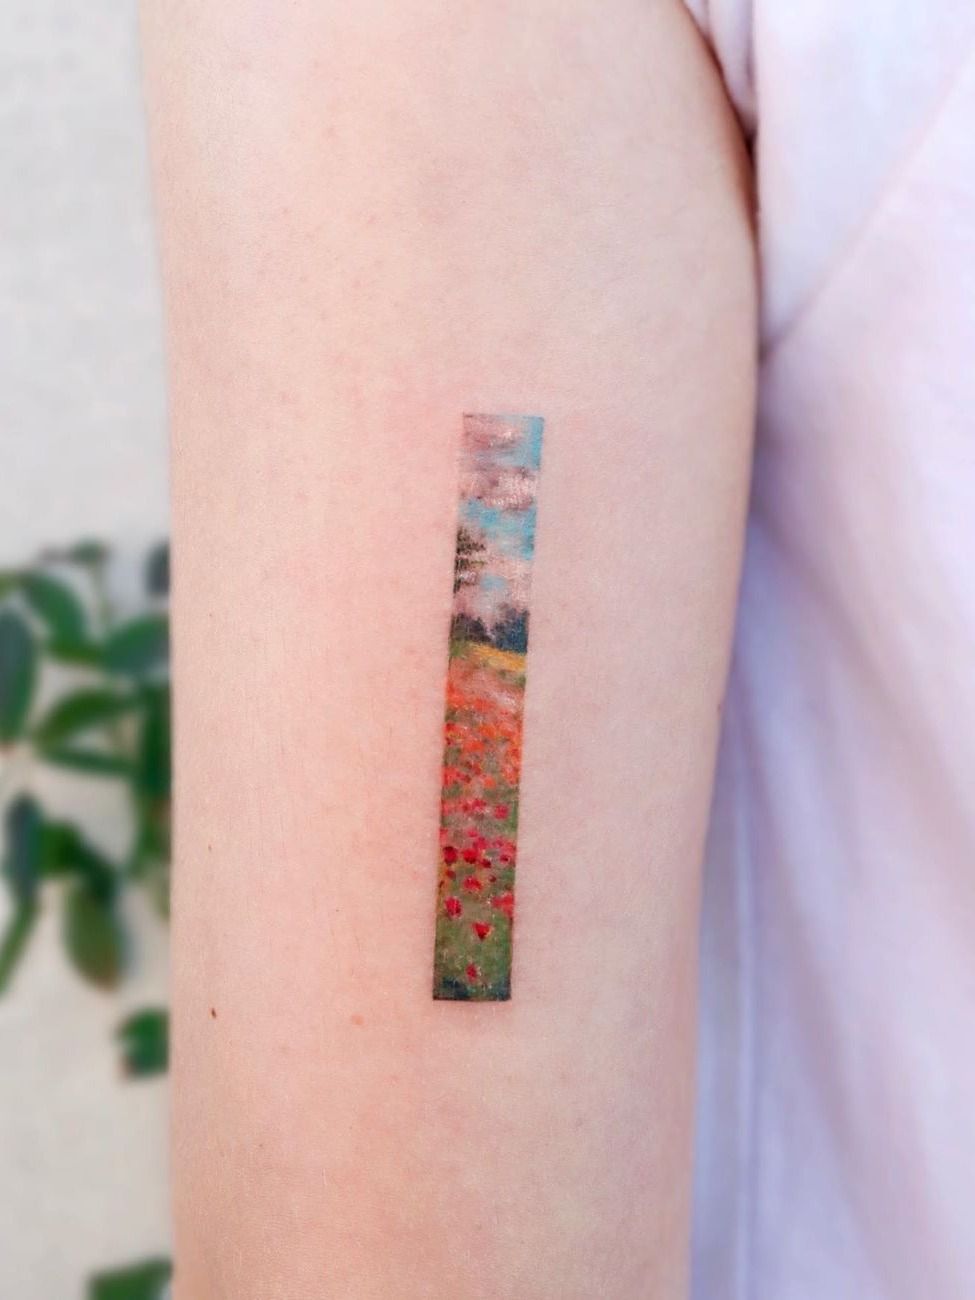 Elegant Rectangle Tattoo Designs Reveal a Sliver of Colorful Scenes